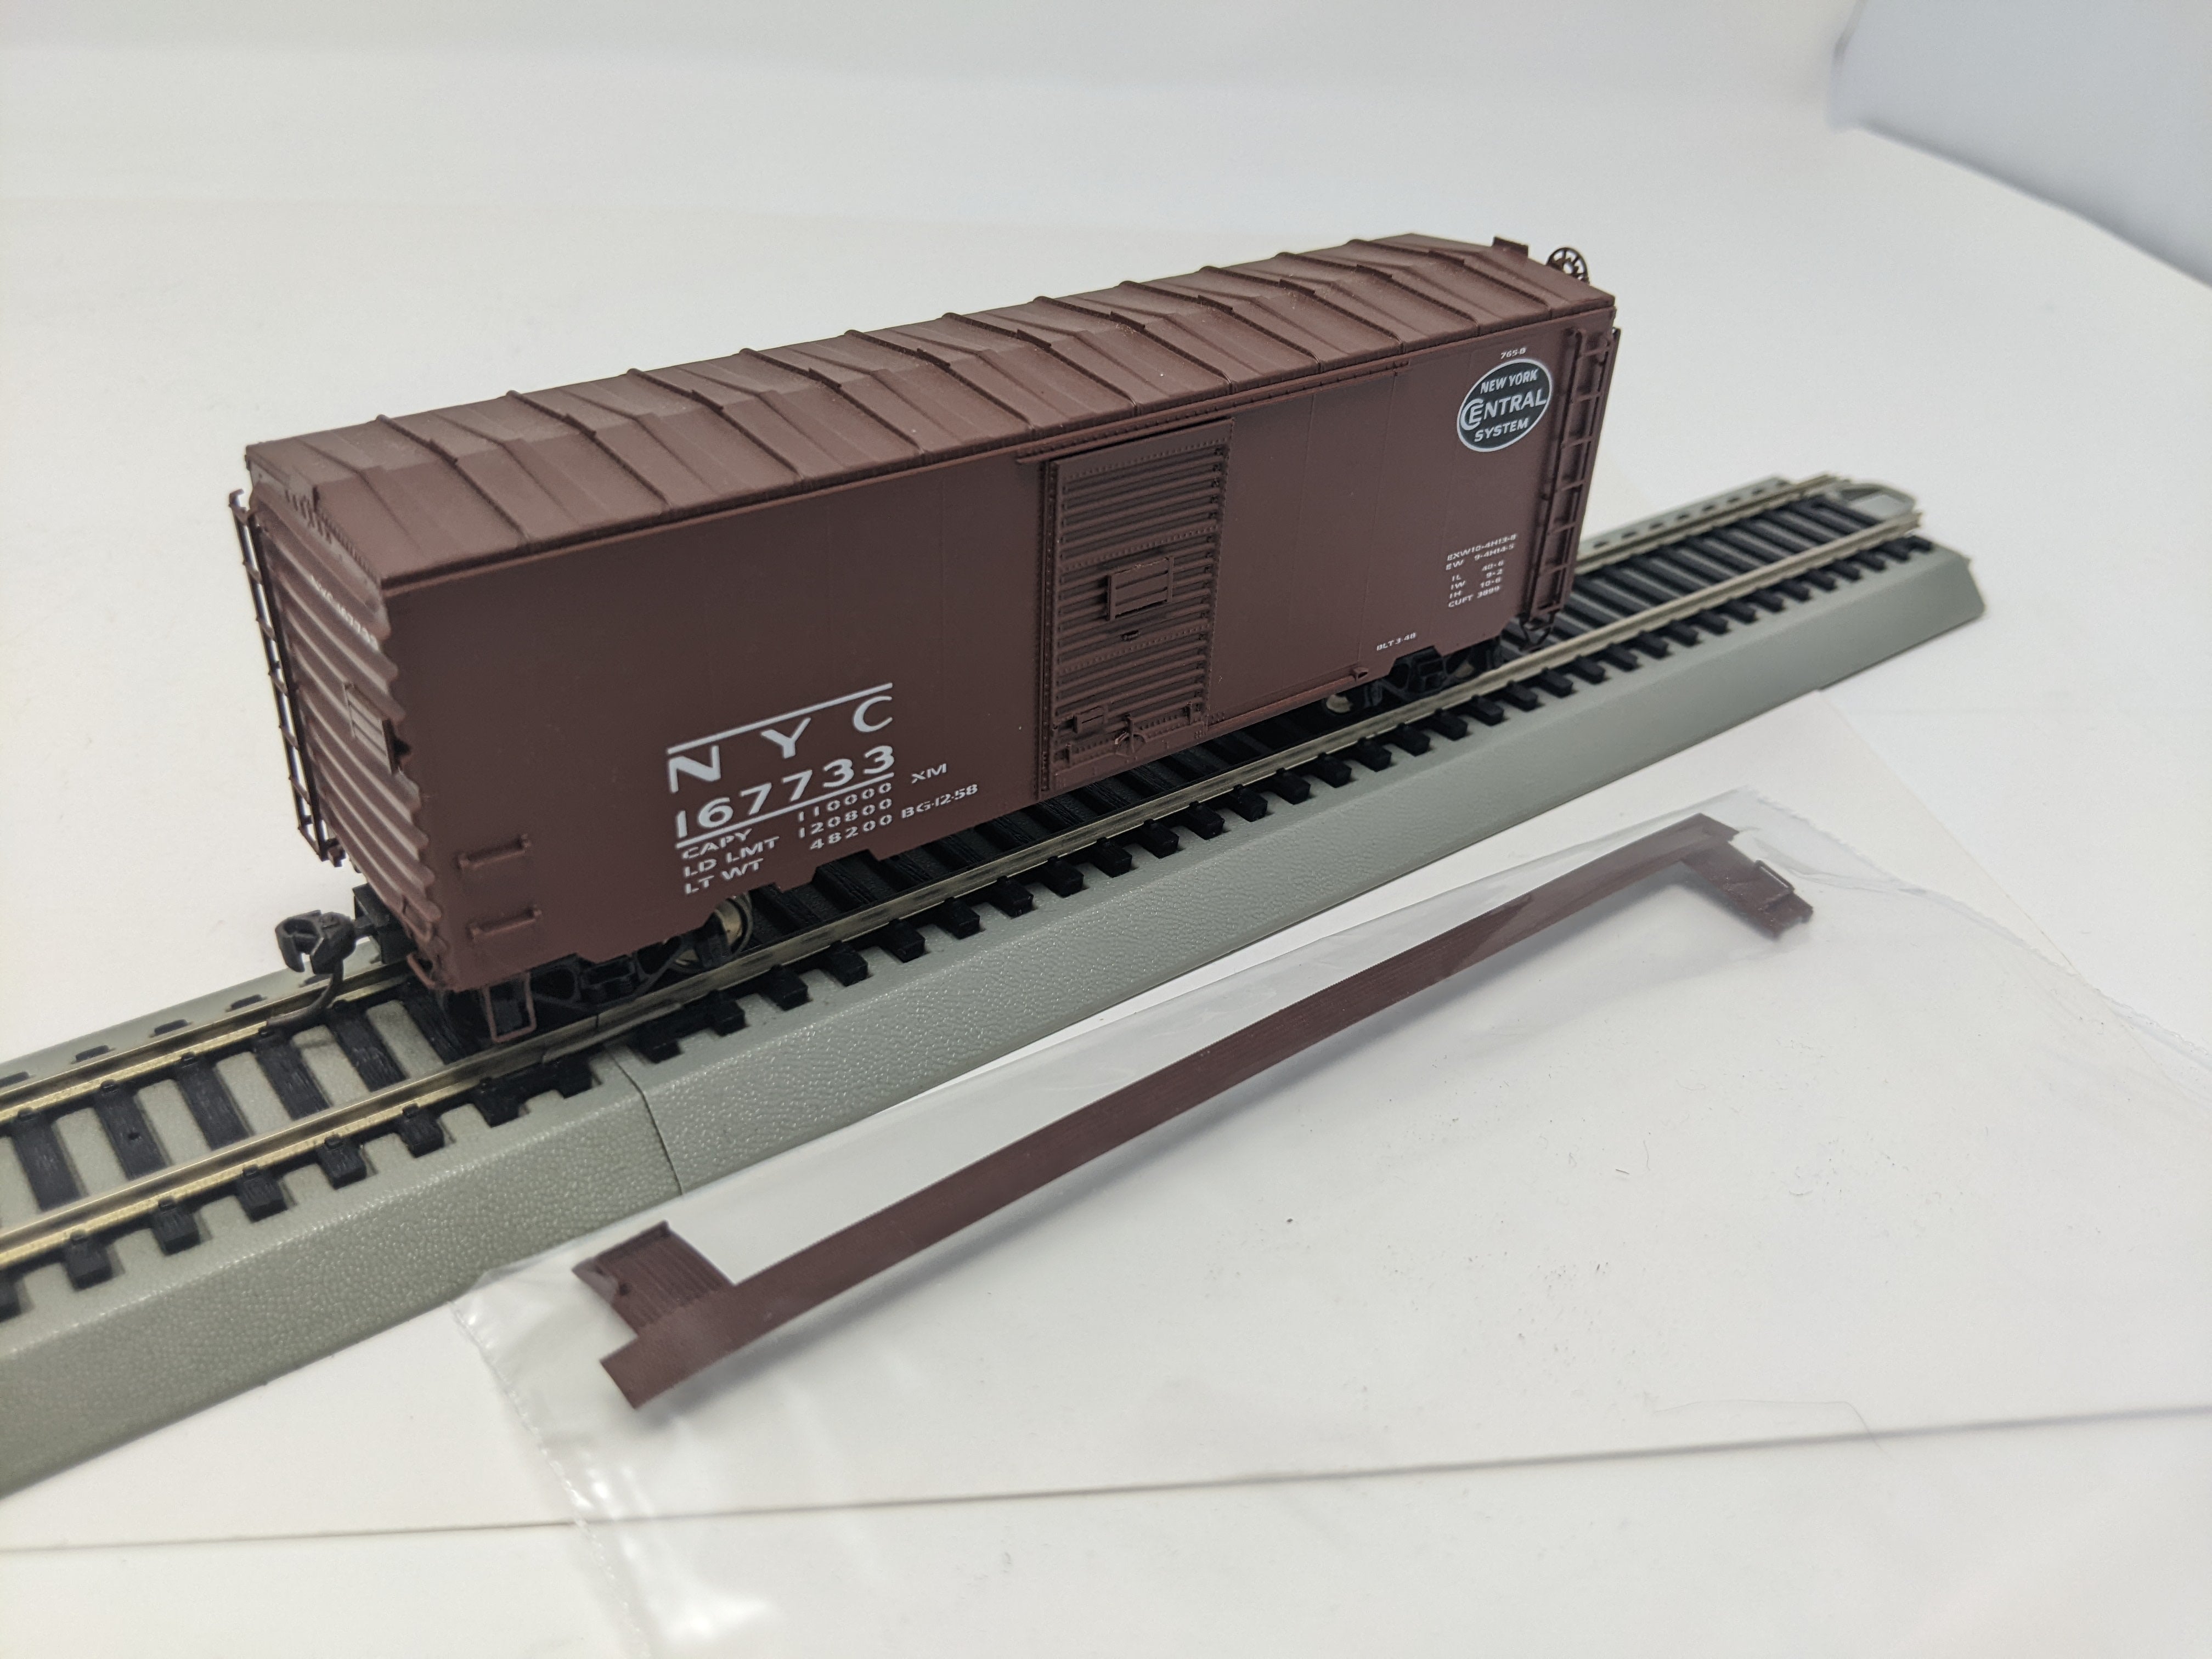 USED HO Scale, 40' Box Car, New York Central NYC #167733, Read Description